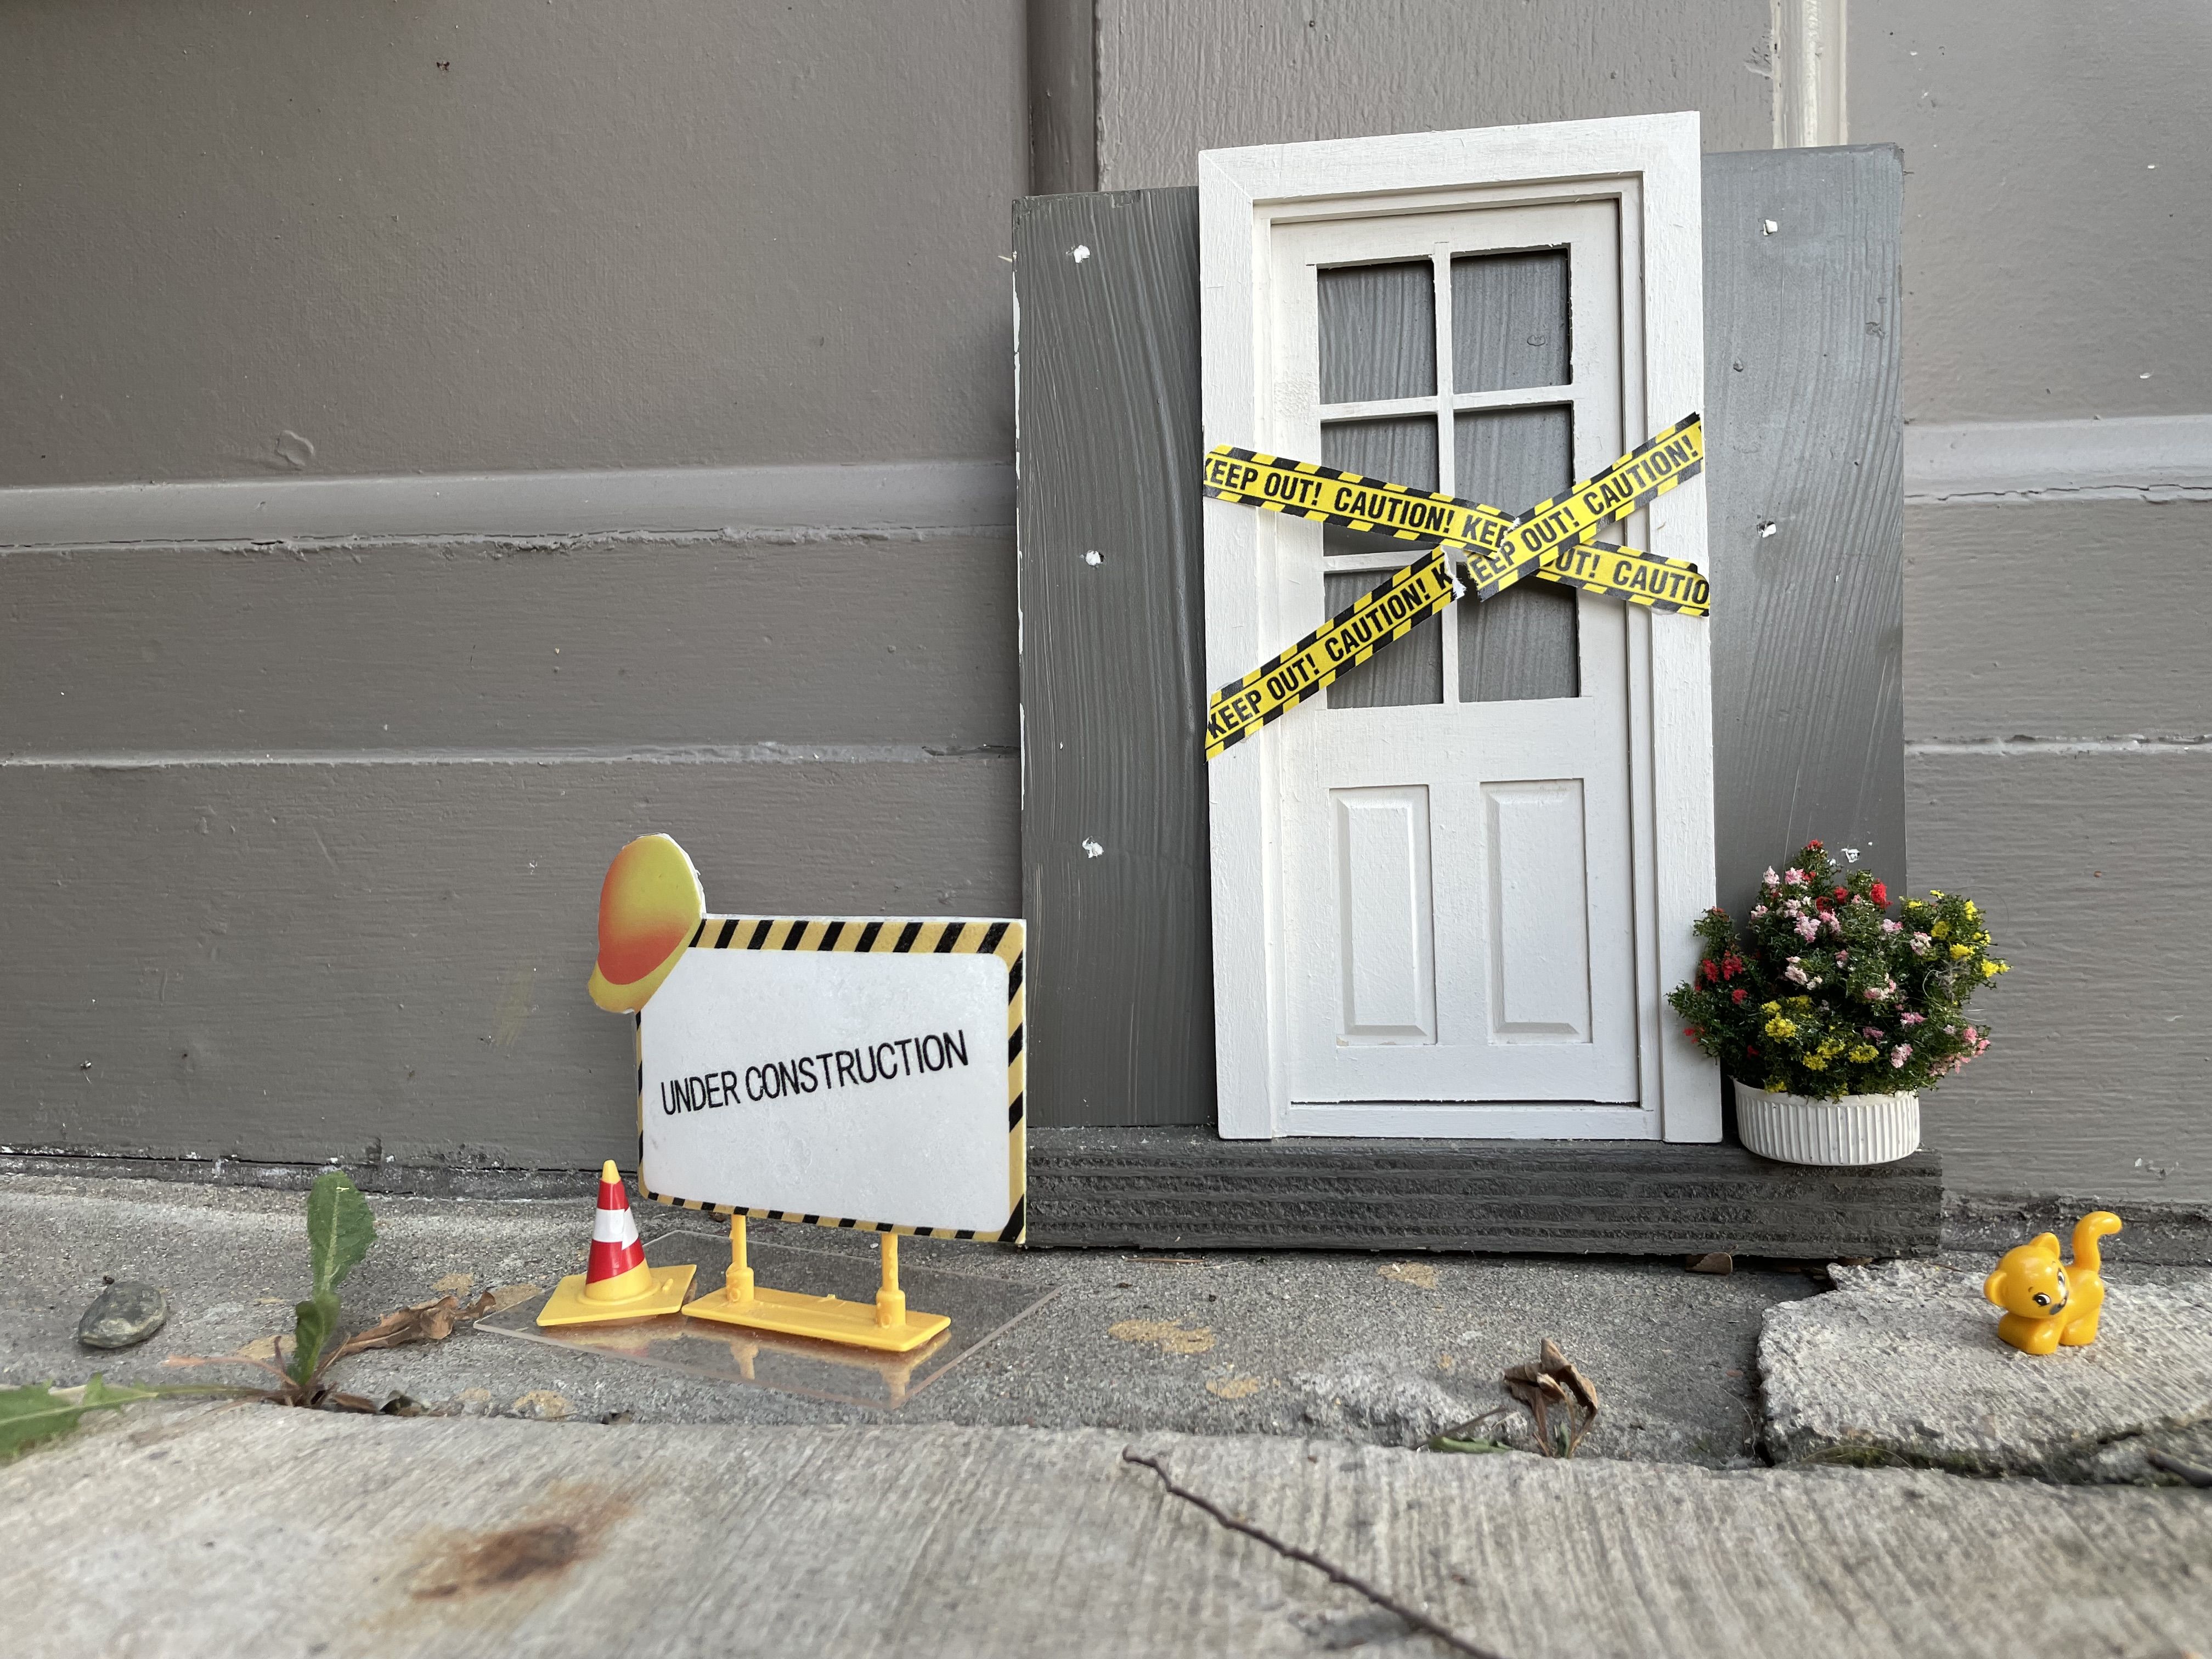 A tiny door with tiny caution tape and an under construction sign